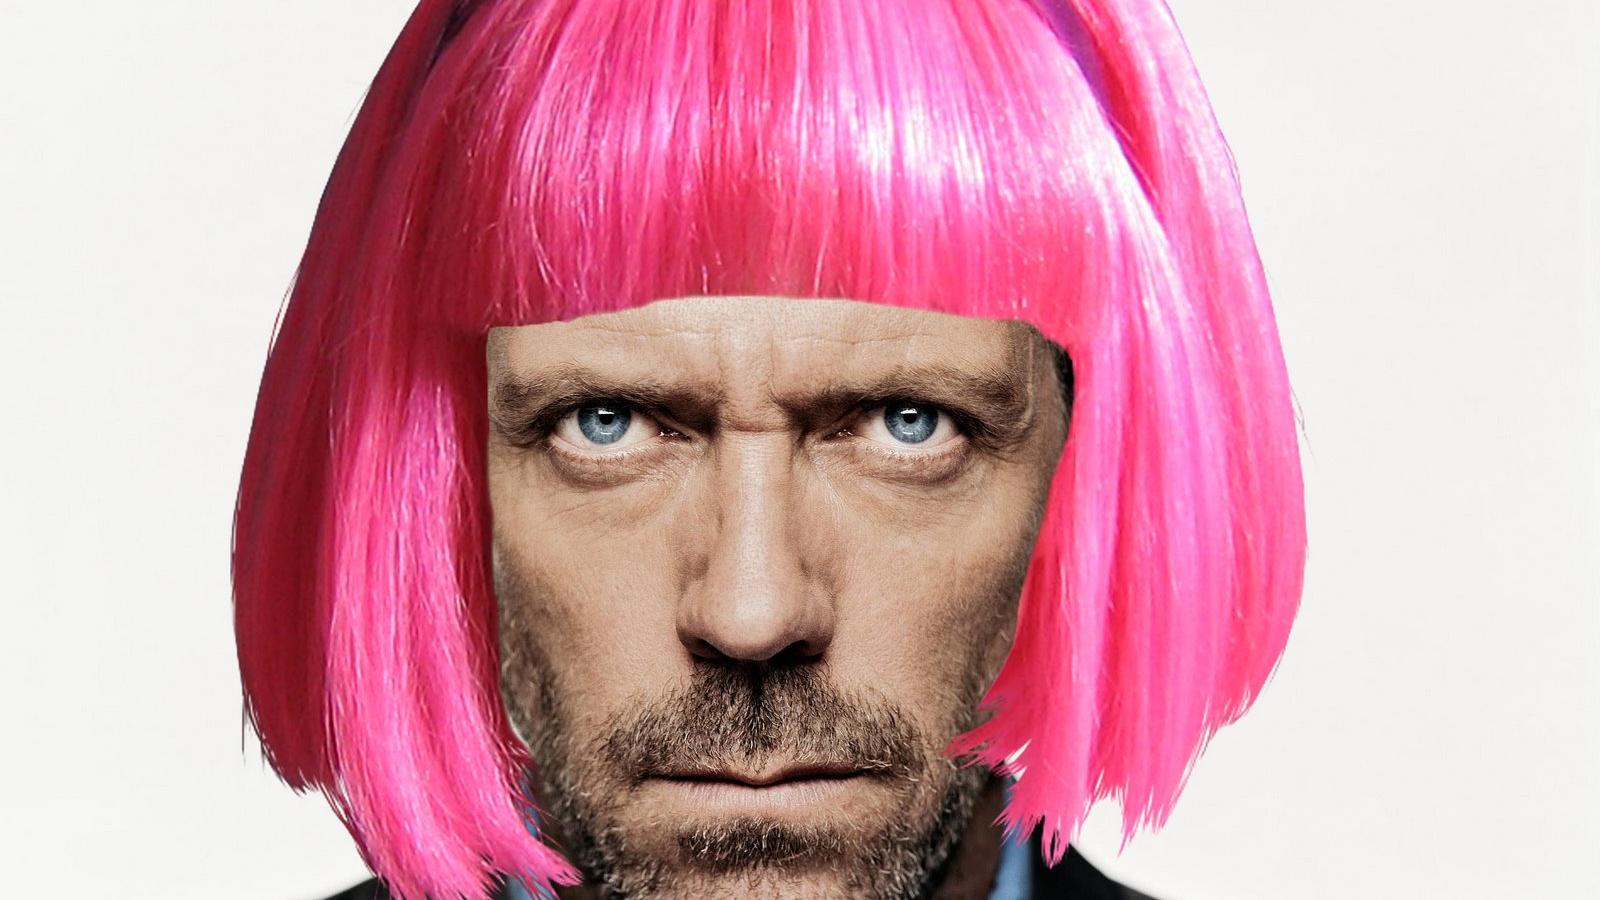 Gregory house hugh laurie lazytown wallpaper - (#180851) - High ...